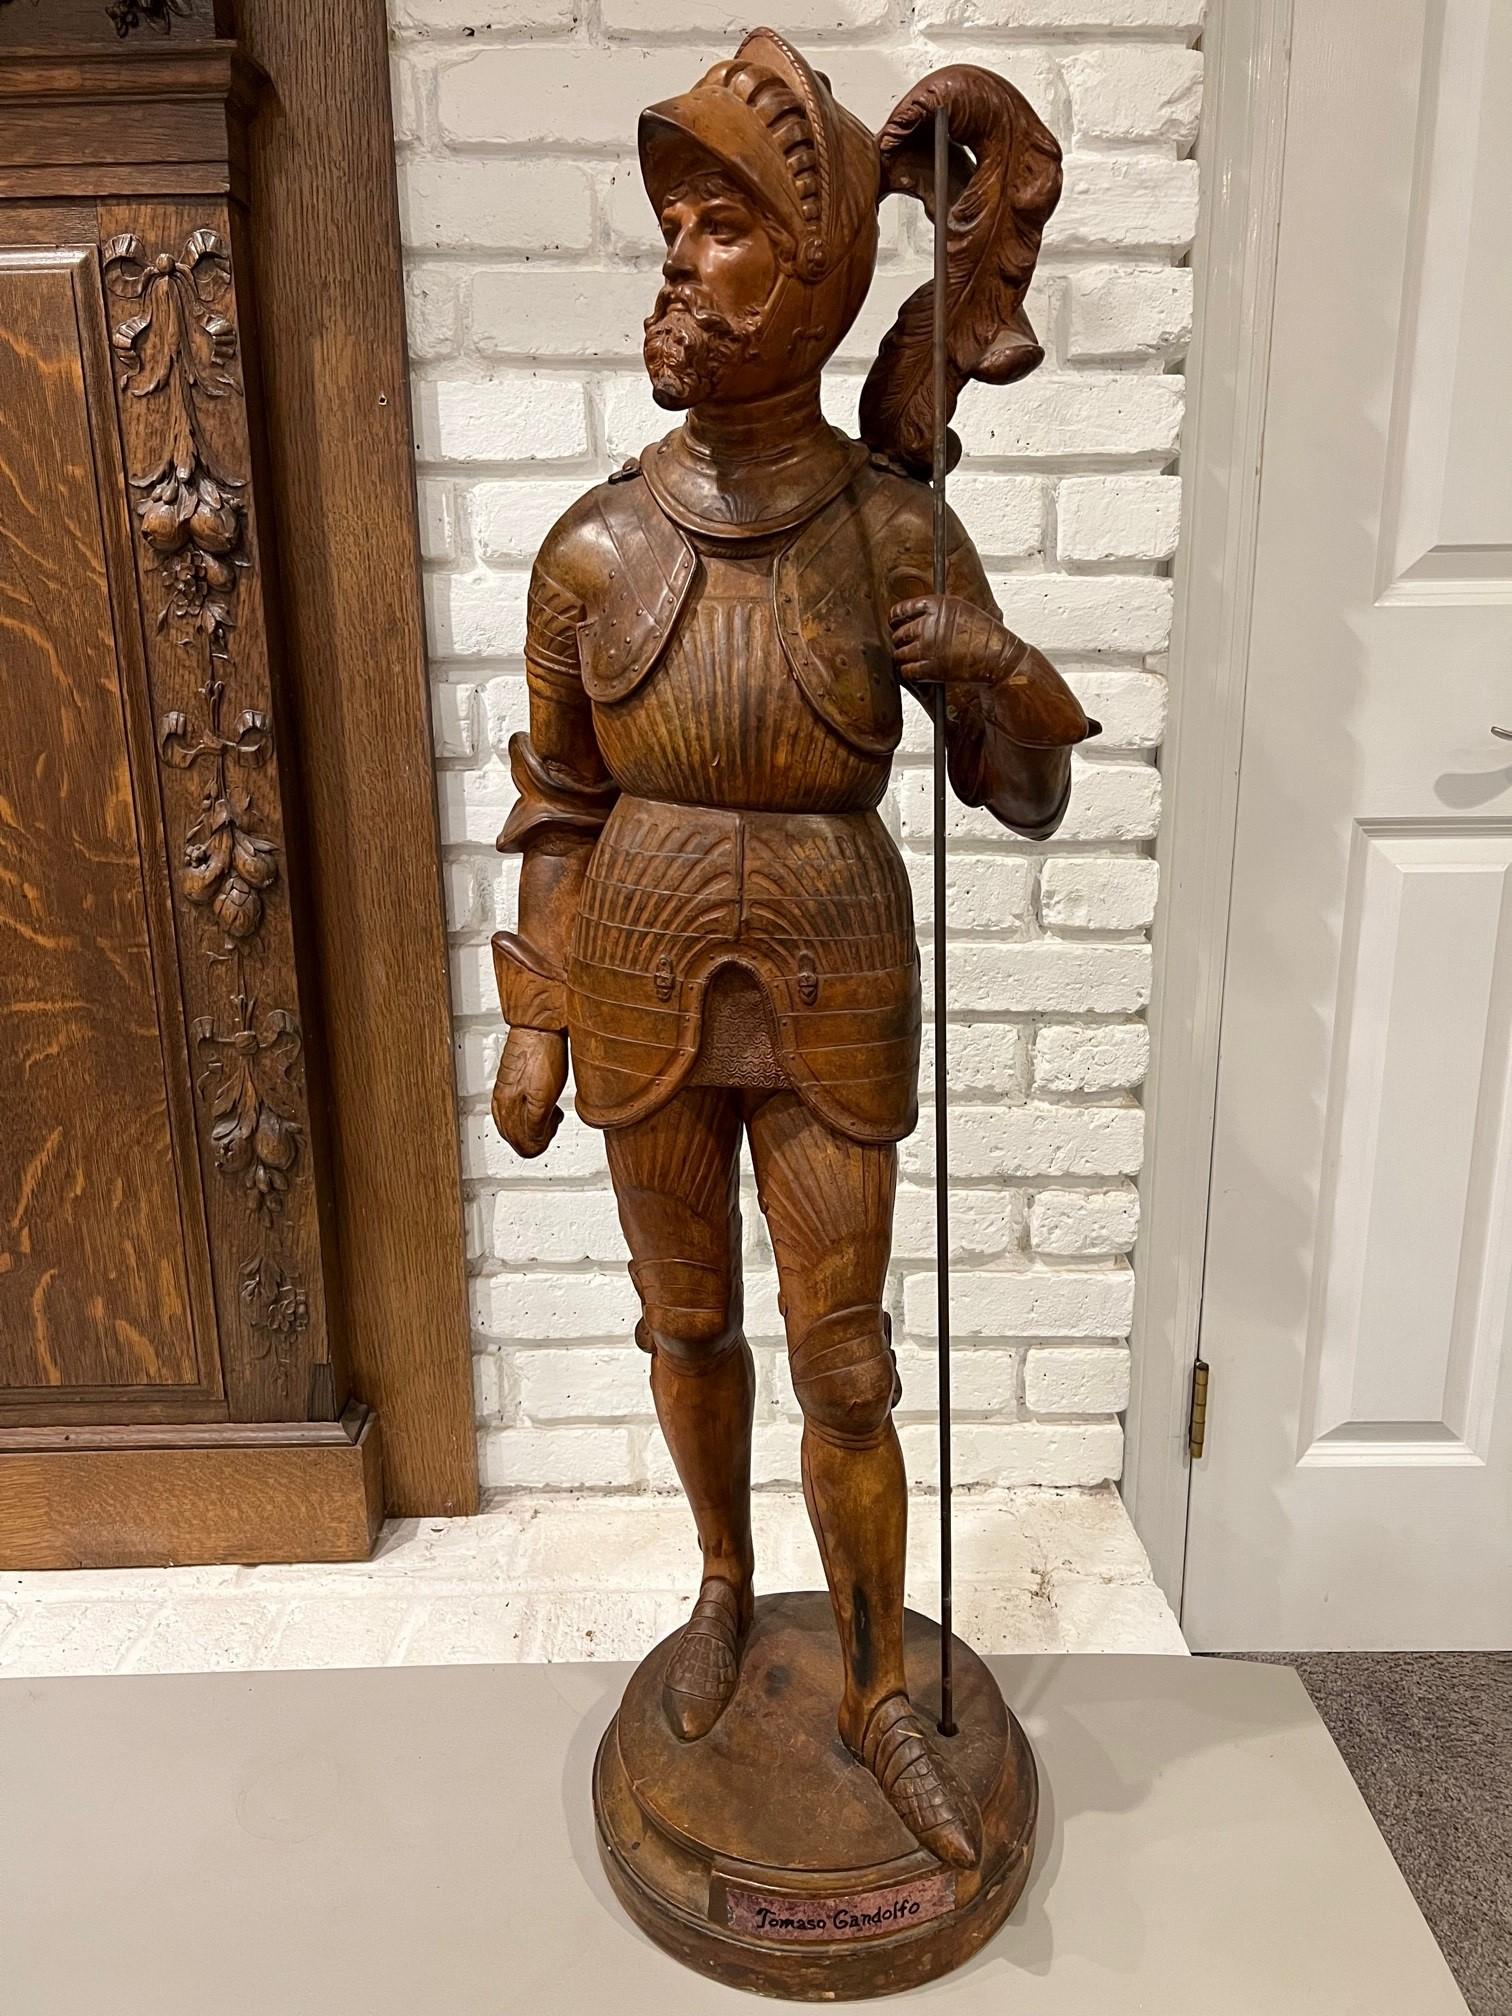 A bold full figure statue of a knight in armor labeled, Tomaso Gandolfo. The Knight I believe is one of The Knights Templar a medieval crusading military order of knights who lived like monks. The Knights Templar were an elite fighting force of